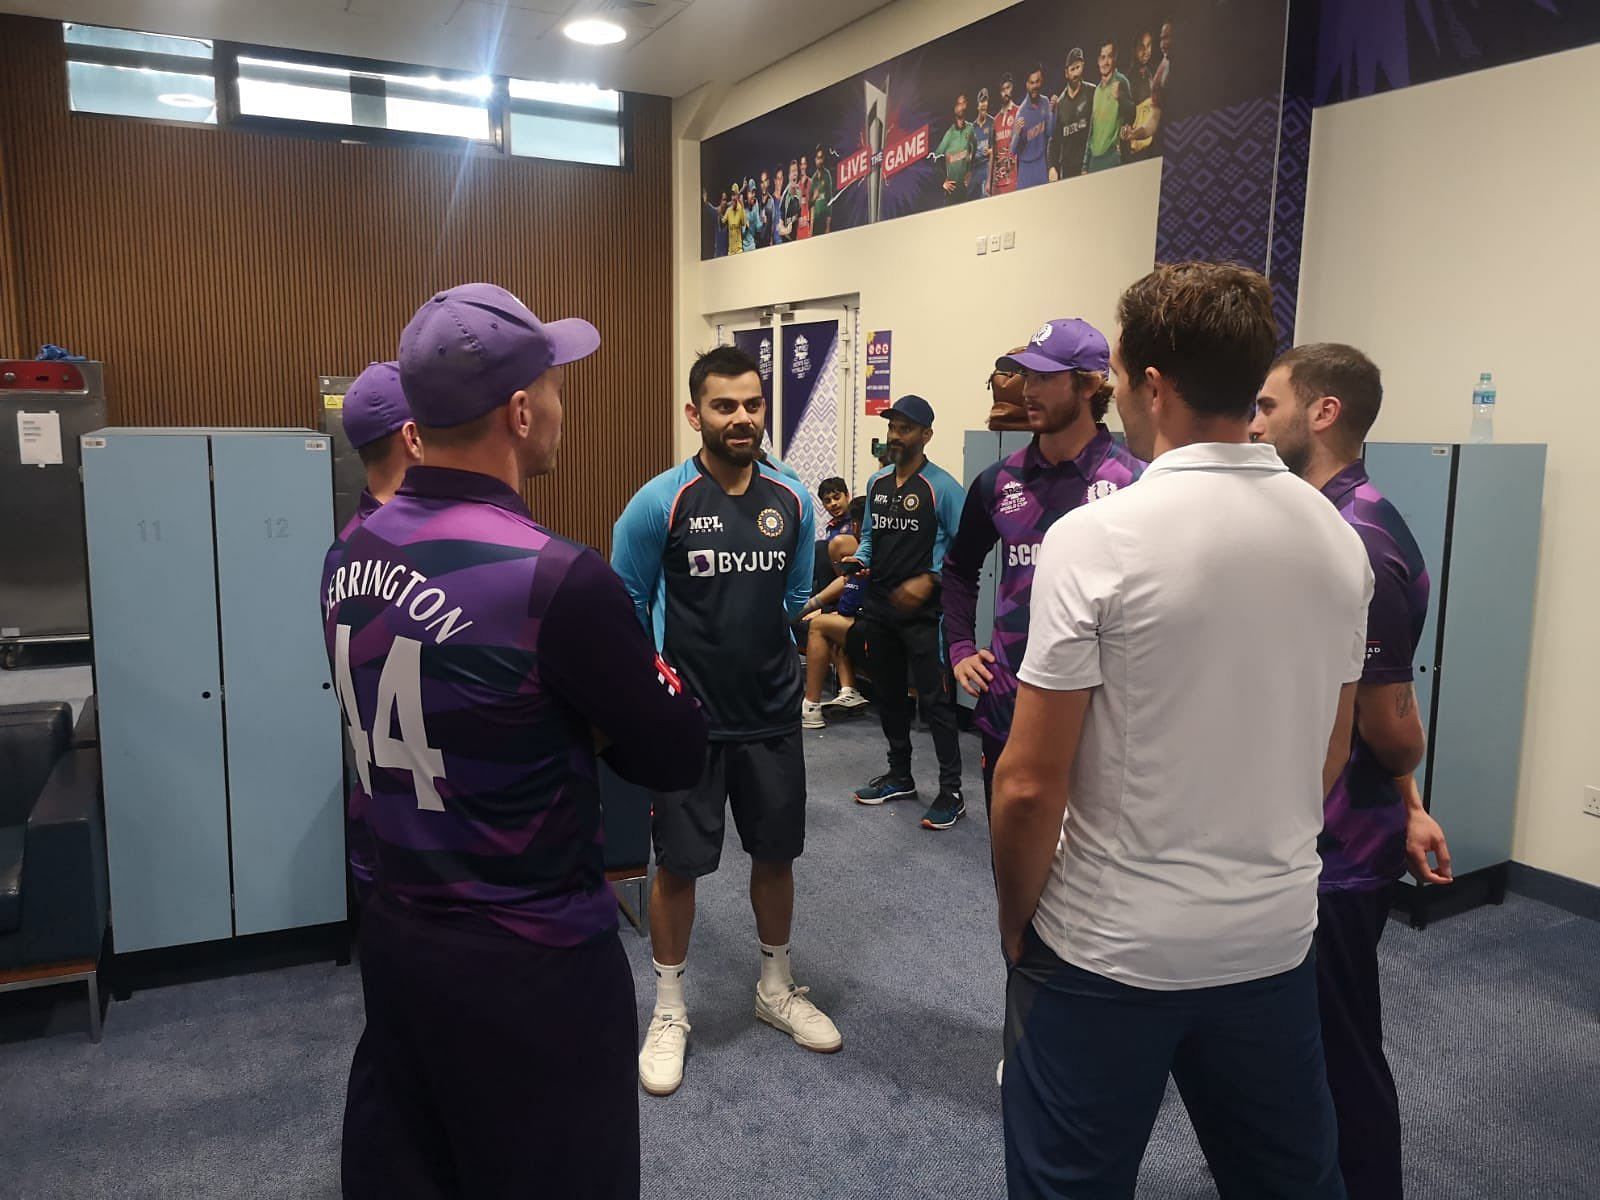 Virat Kohli and other Indian cricketers visited Scotland&#039;s dressing room after the game (Credit: Twitter)